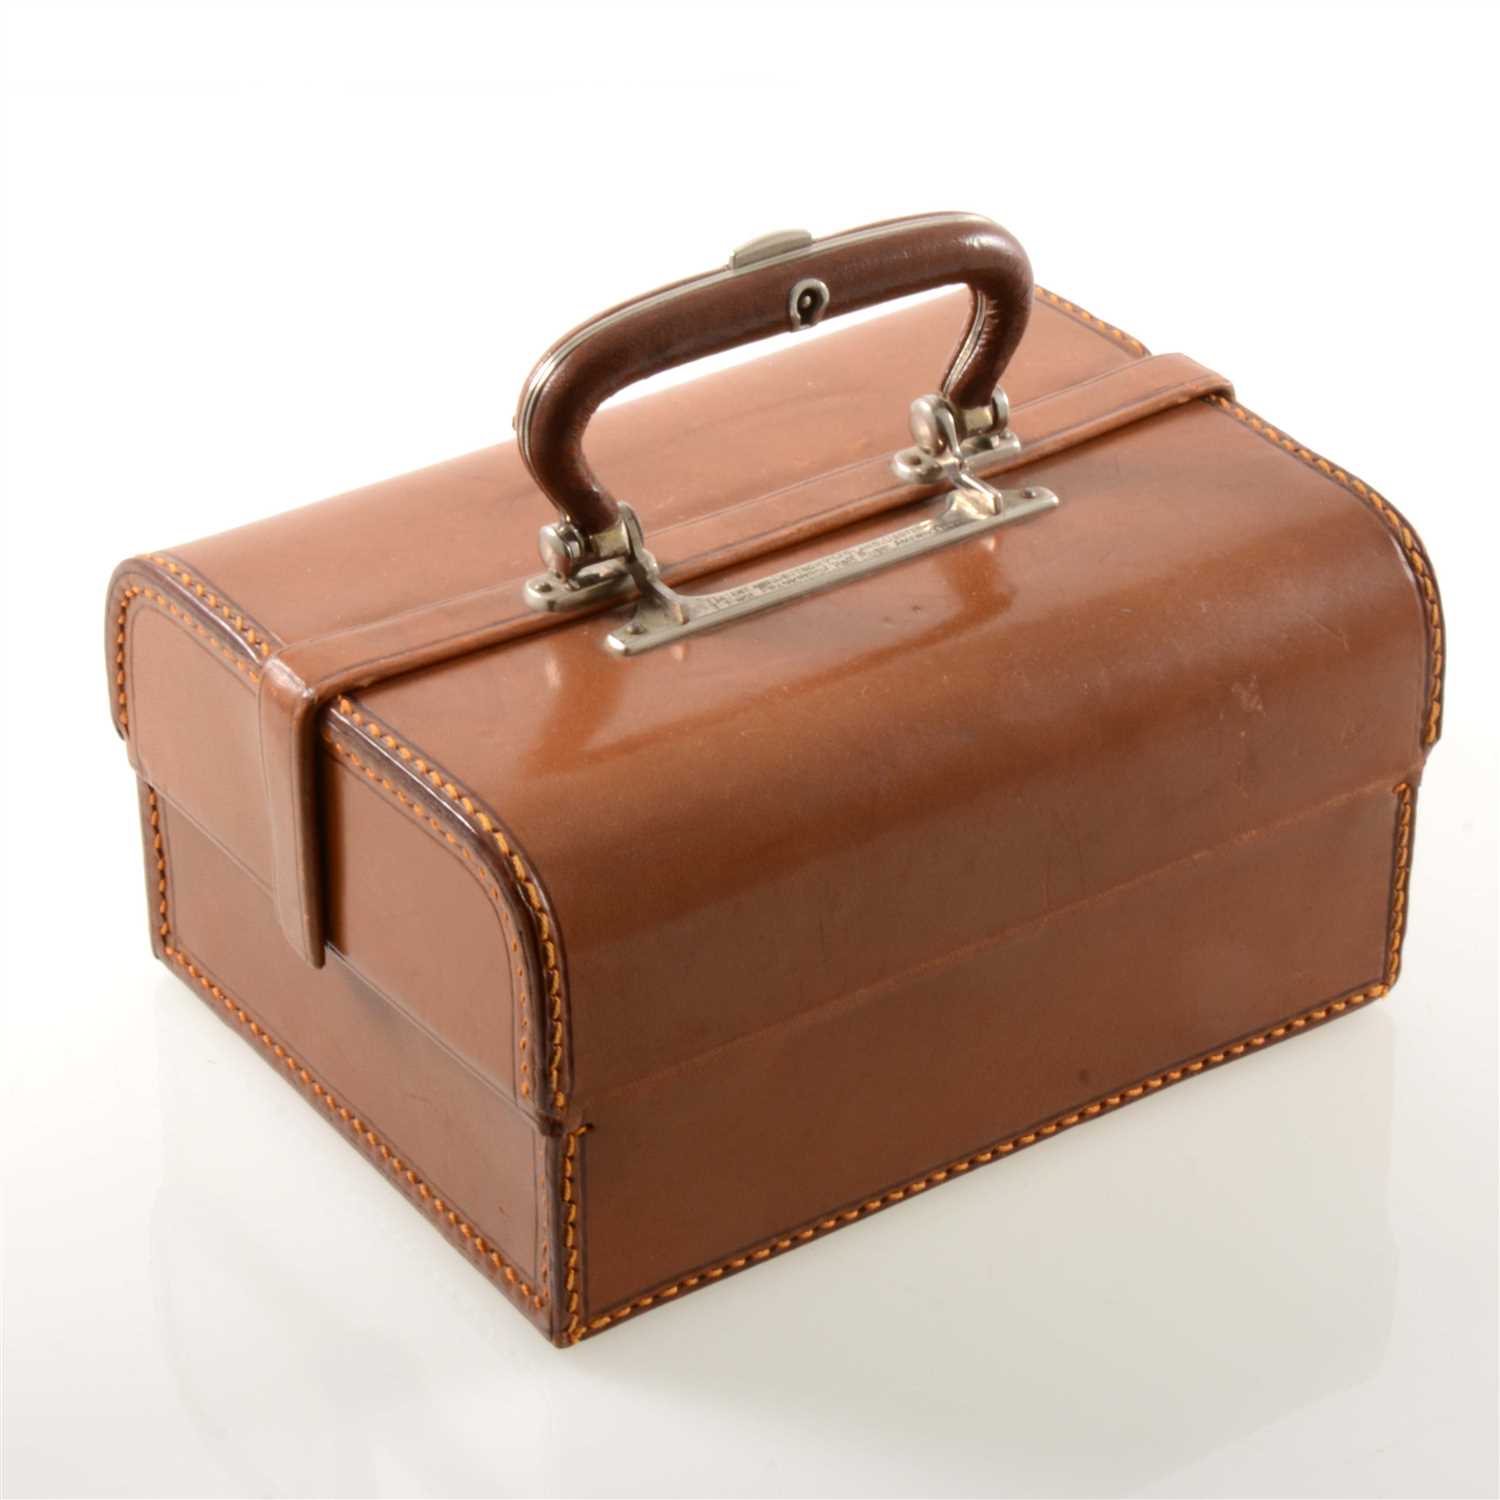 272 - A tan leather jewellery case with lift out tray